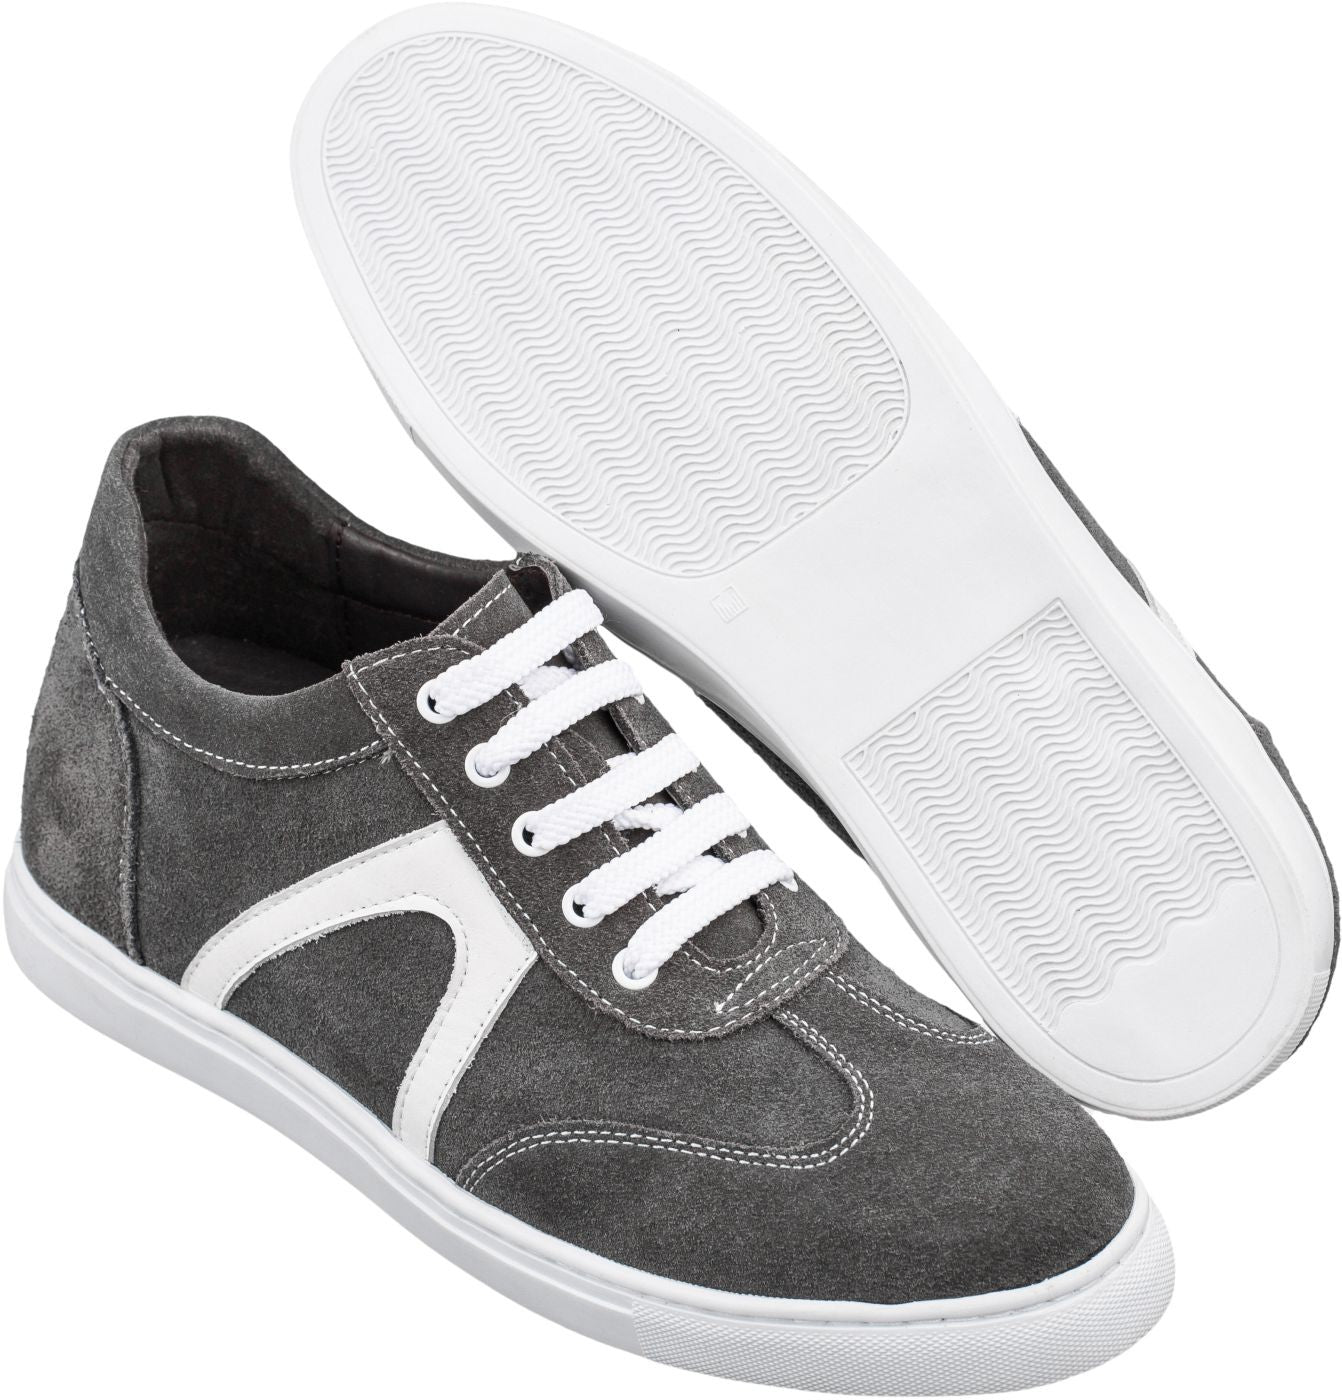 Elevator shoes height increase CALTO - T5319 - 2.6 Inches Taller (Grey/White) - Sueded